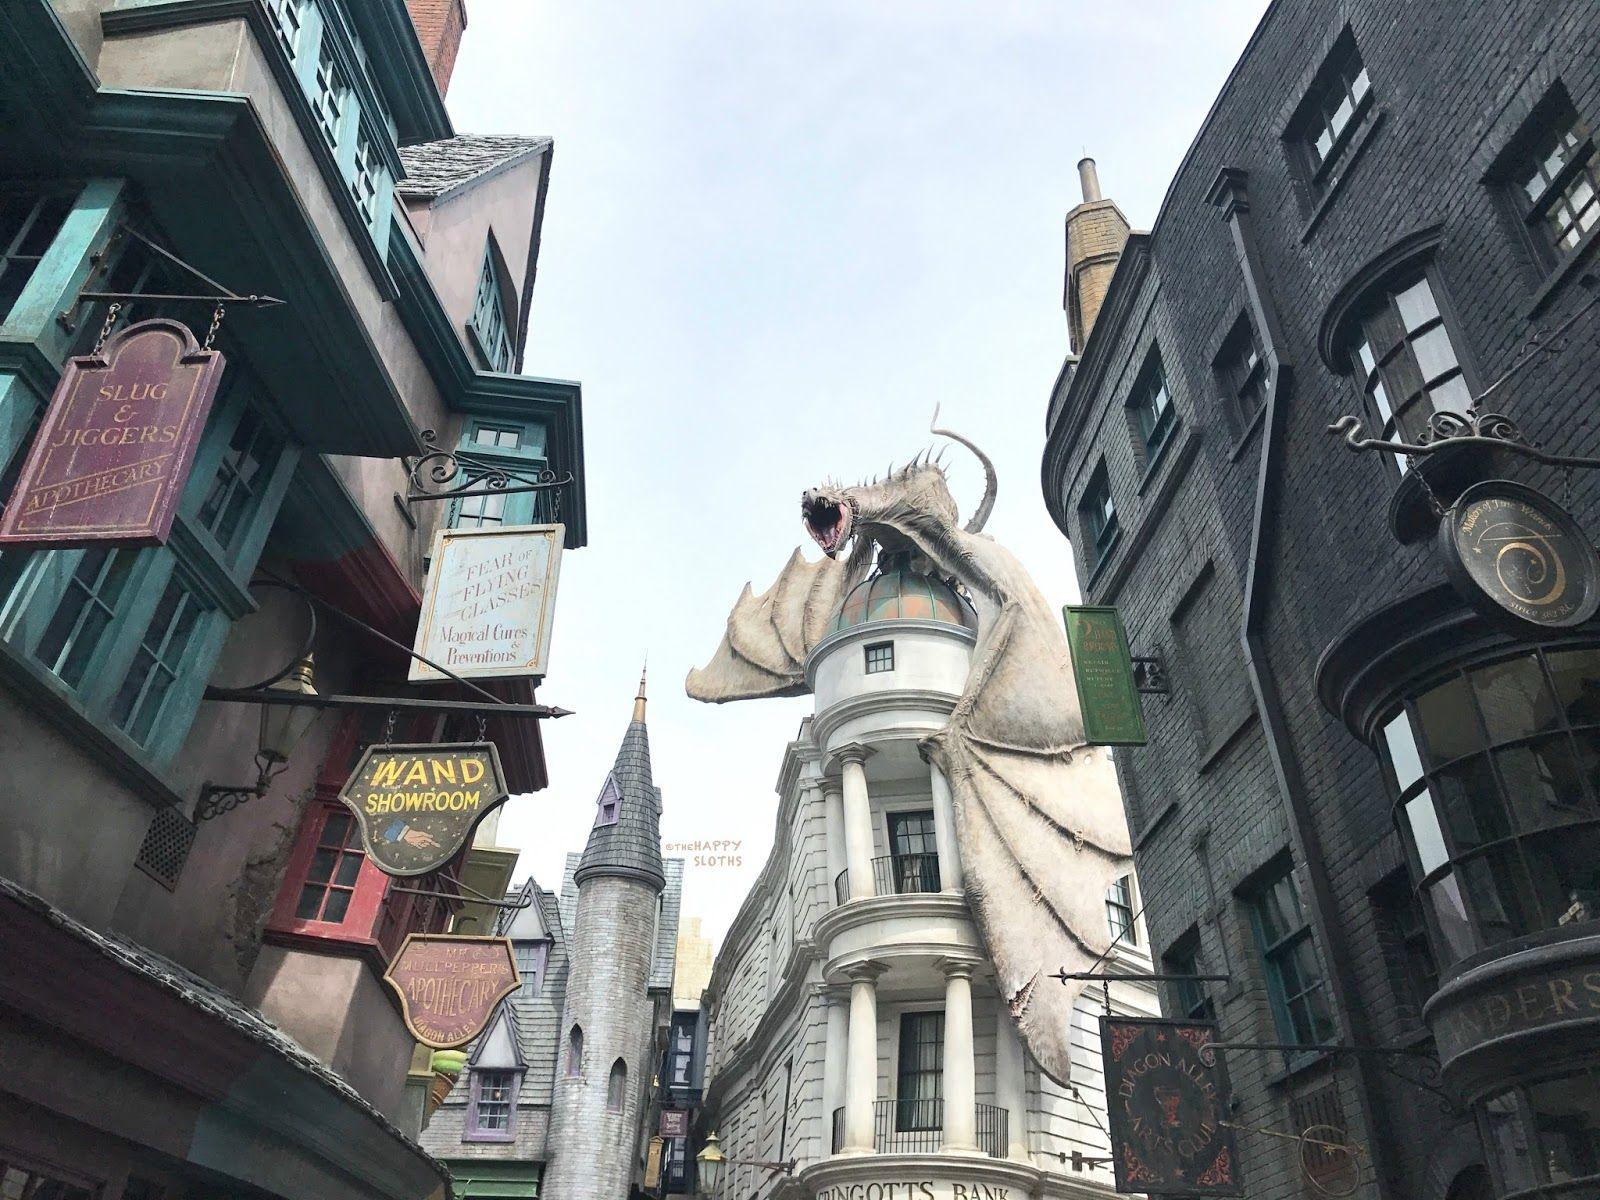 My Trip to Universal Orlando. The Wizarding World of Harry Potter